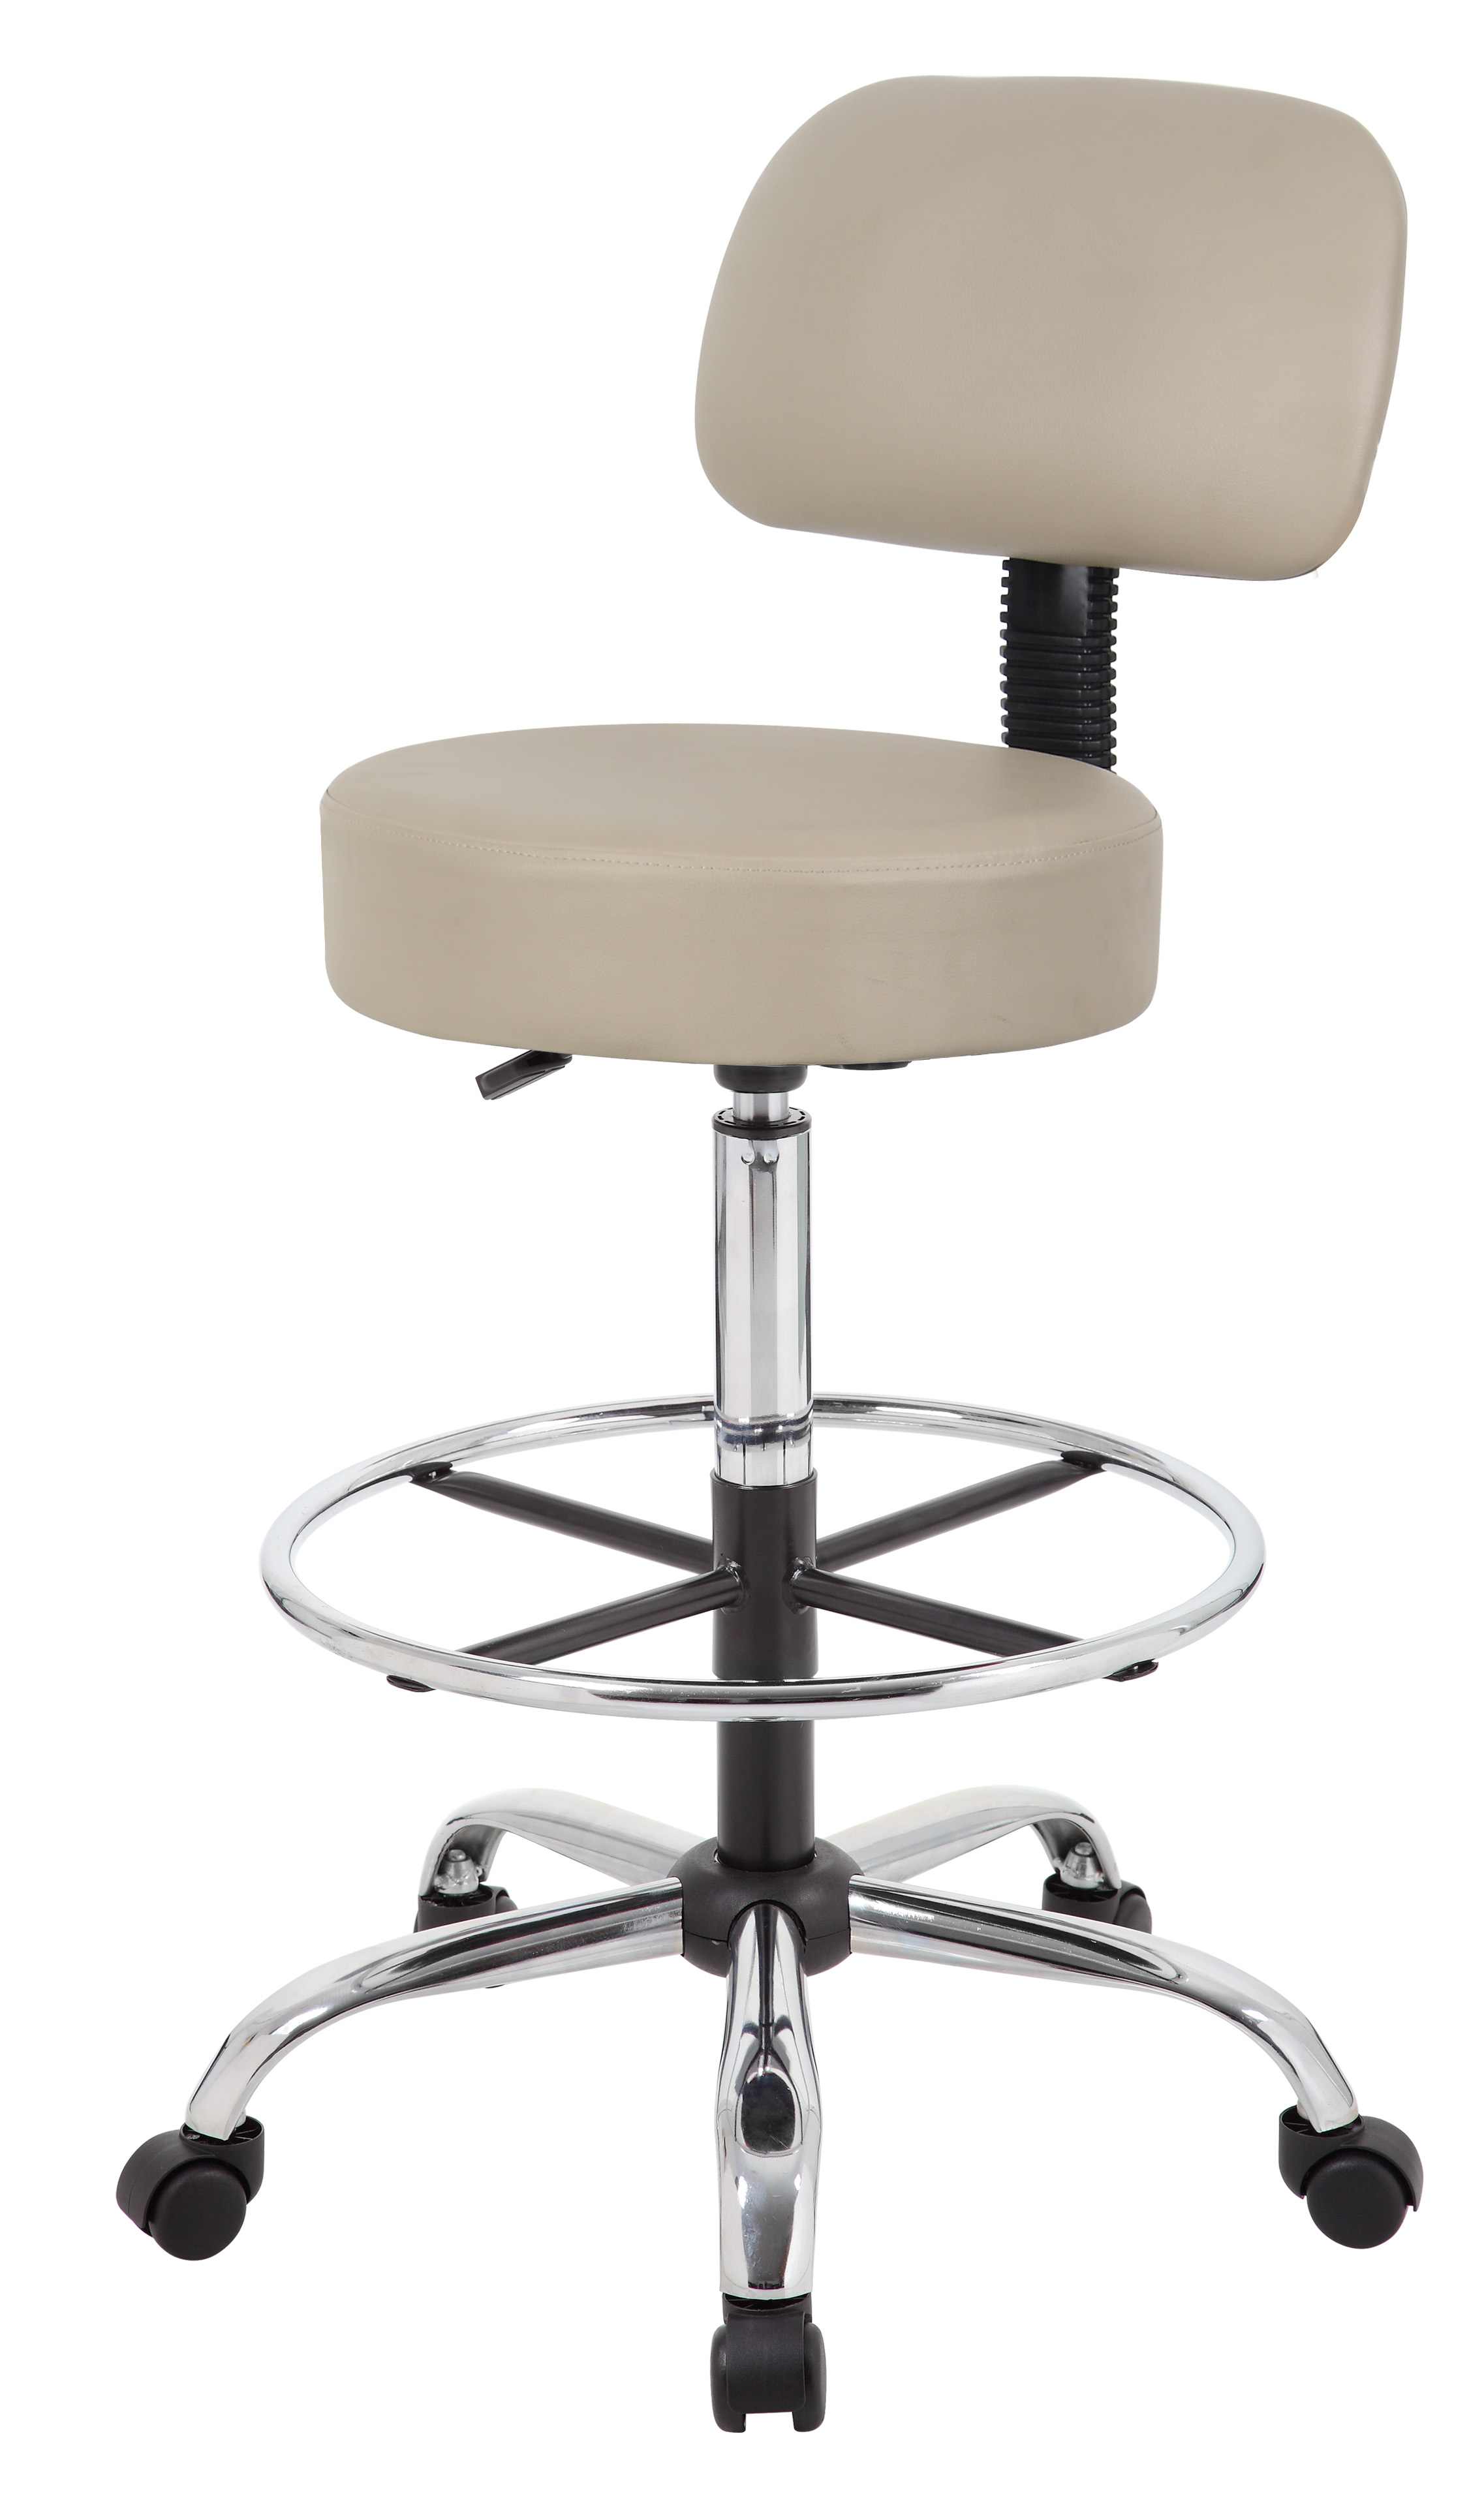 Boss Office Black Caressoft Medical & Spa Stool Chair for sale online 